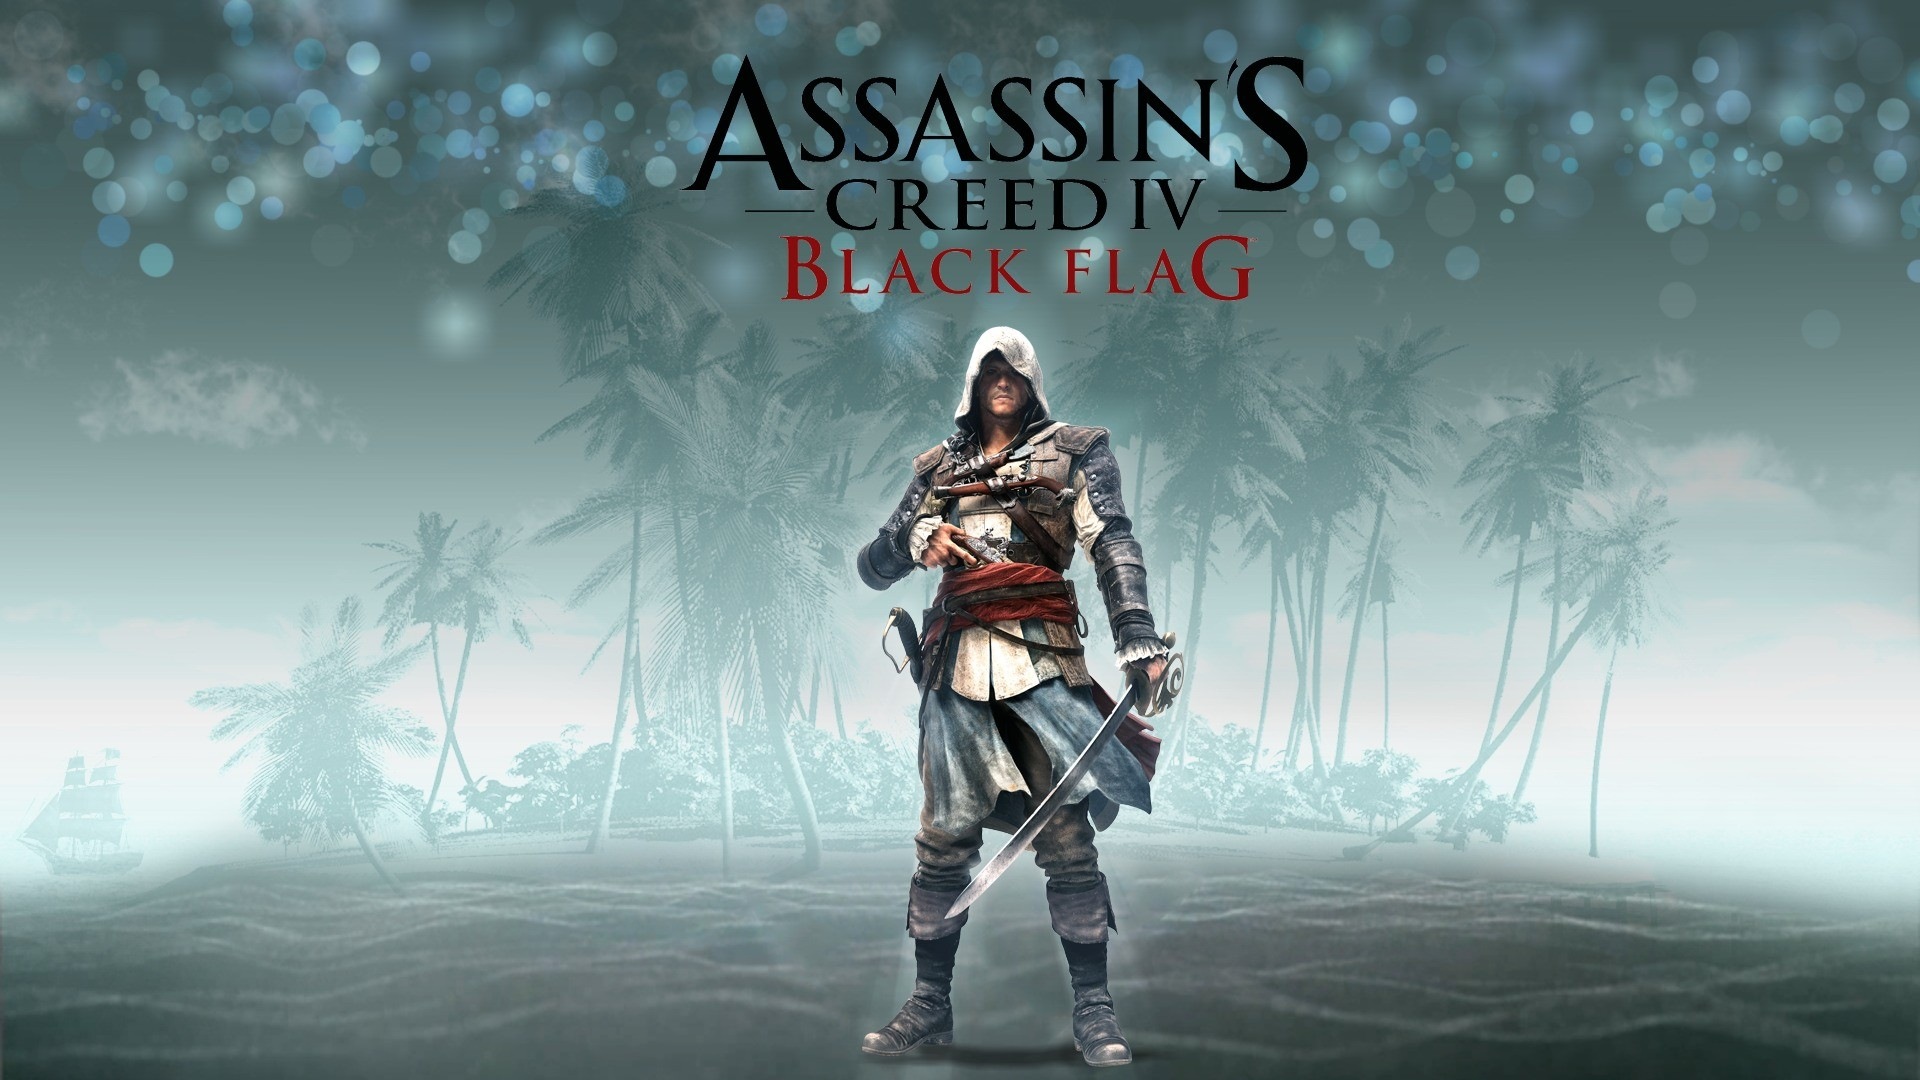 Creed IV Assassin: Black Flag HD wallpapers #14 - 1920x1080